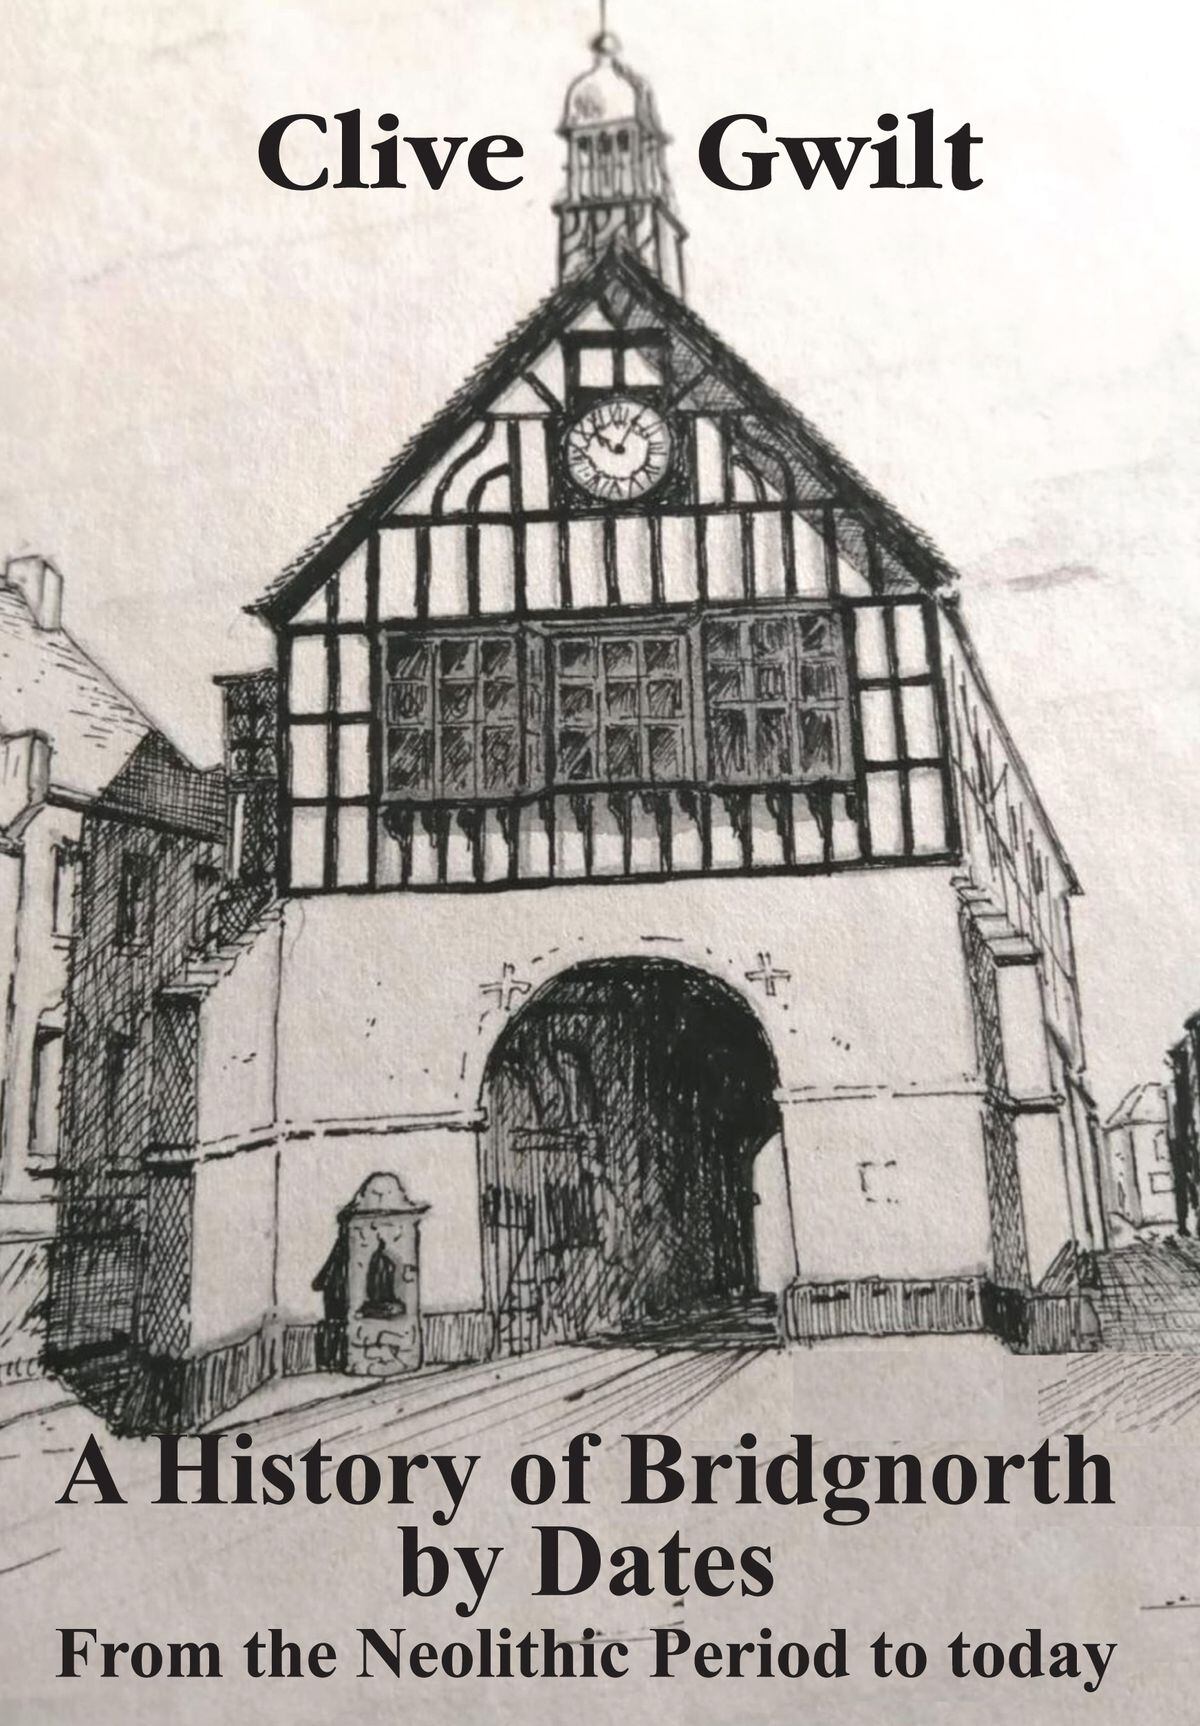 A History of Bridgnorth by Dates by Clive Gwilt.